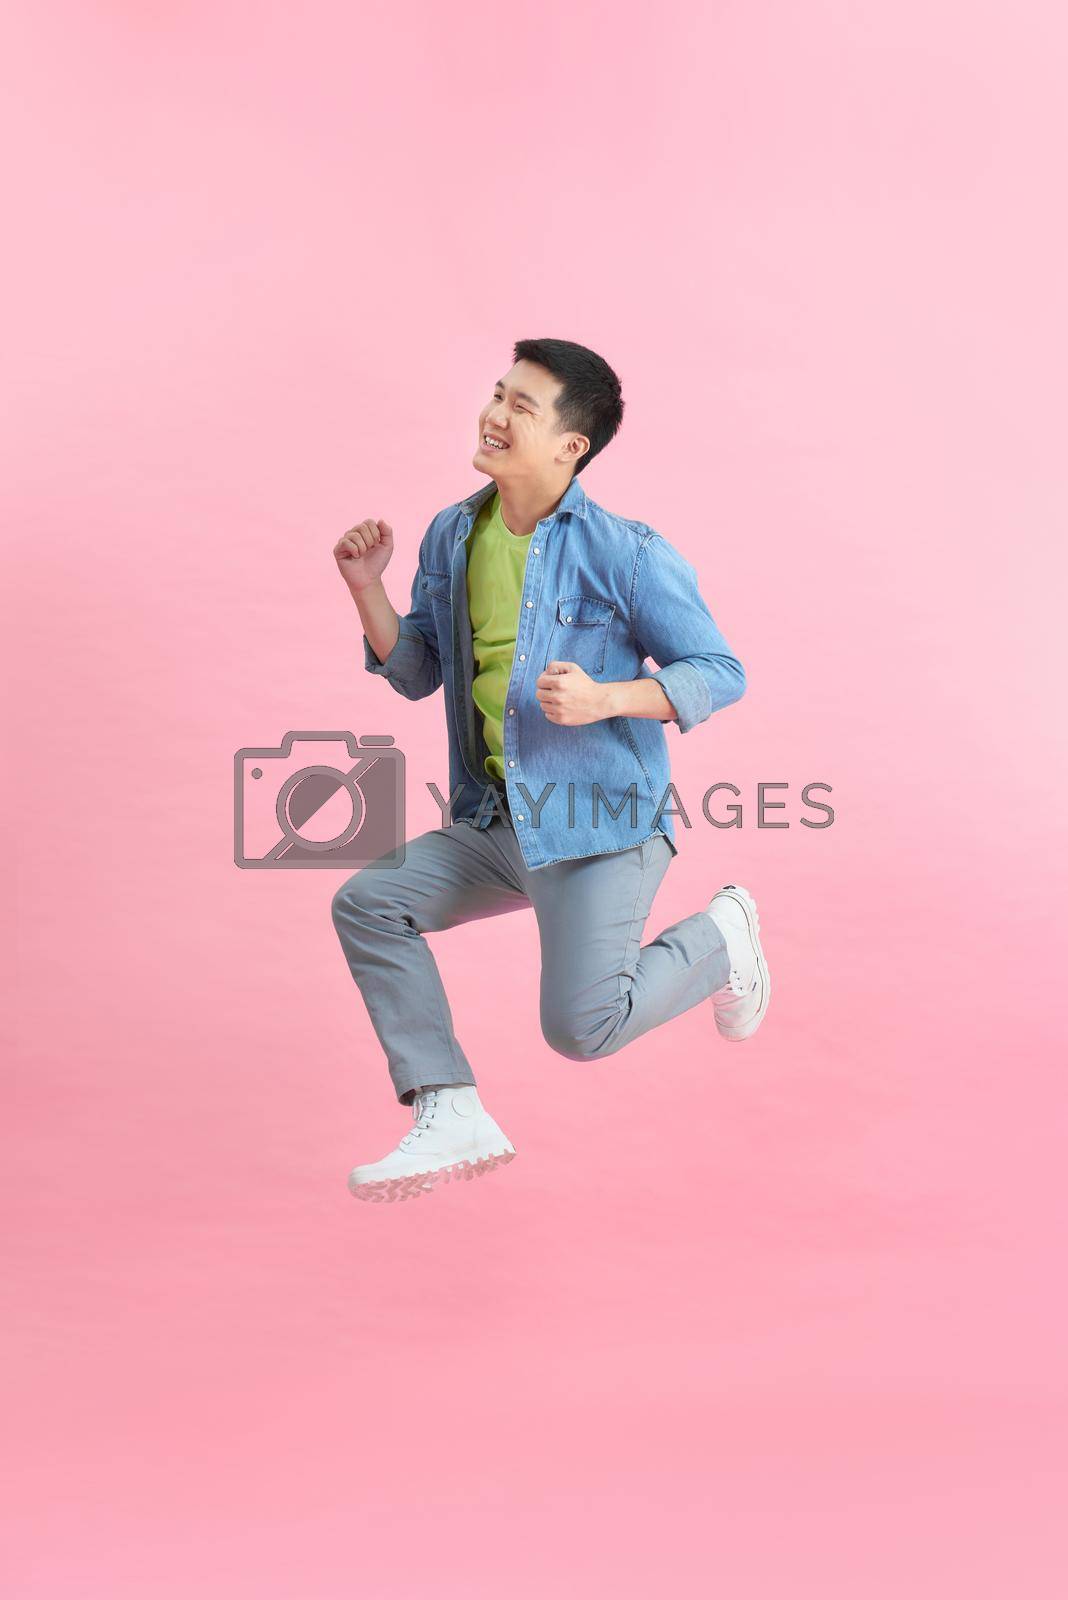 Royalty free image of Energetic happy young Asian man jumping isolated in pink background by makidotvn